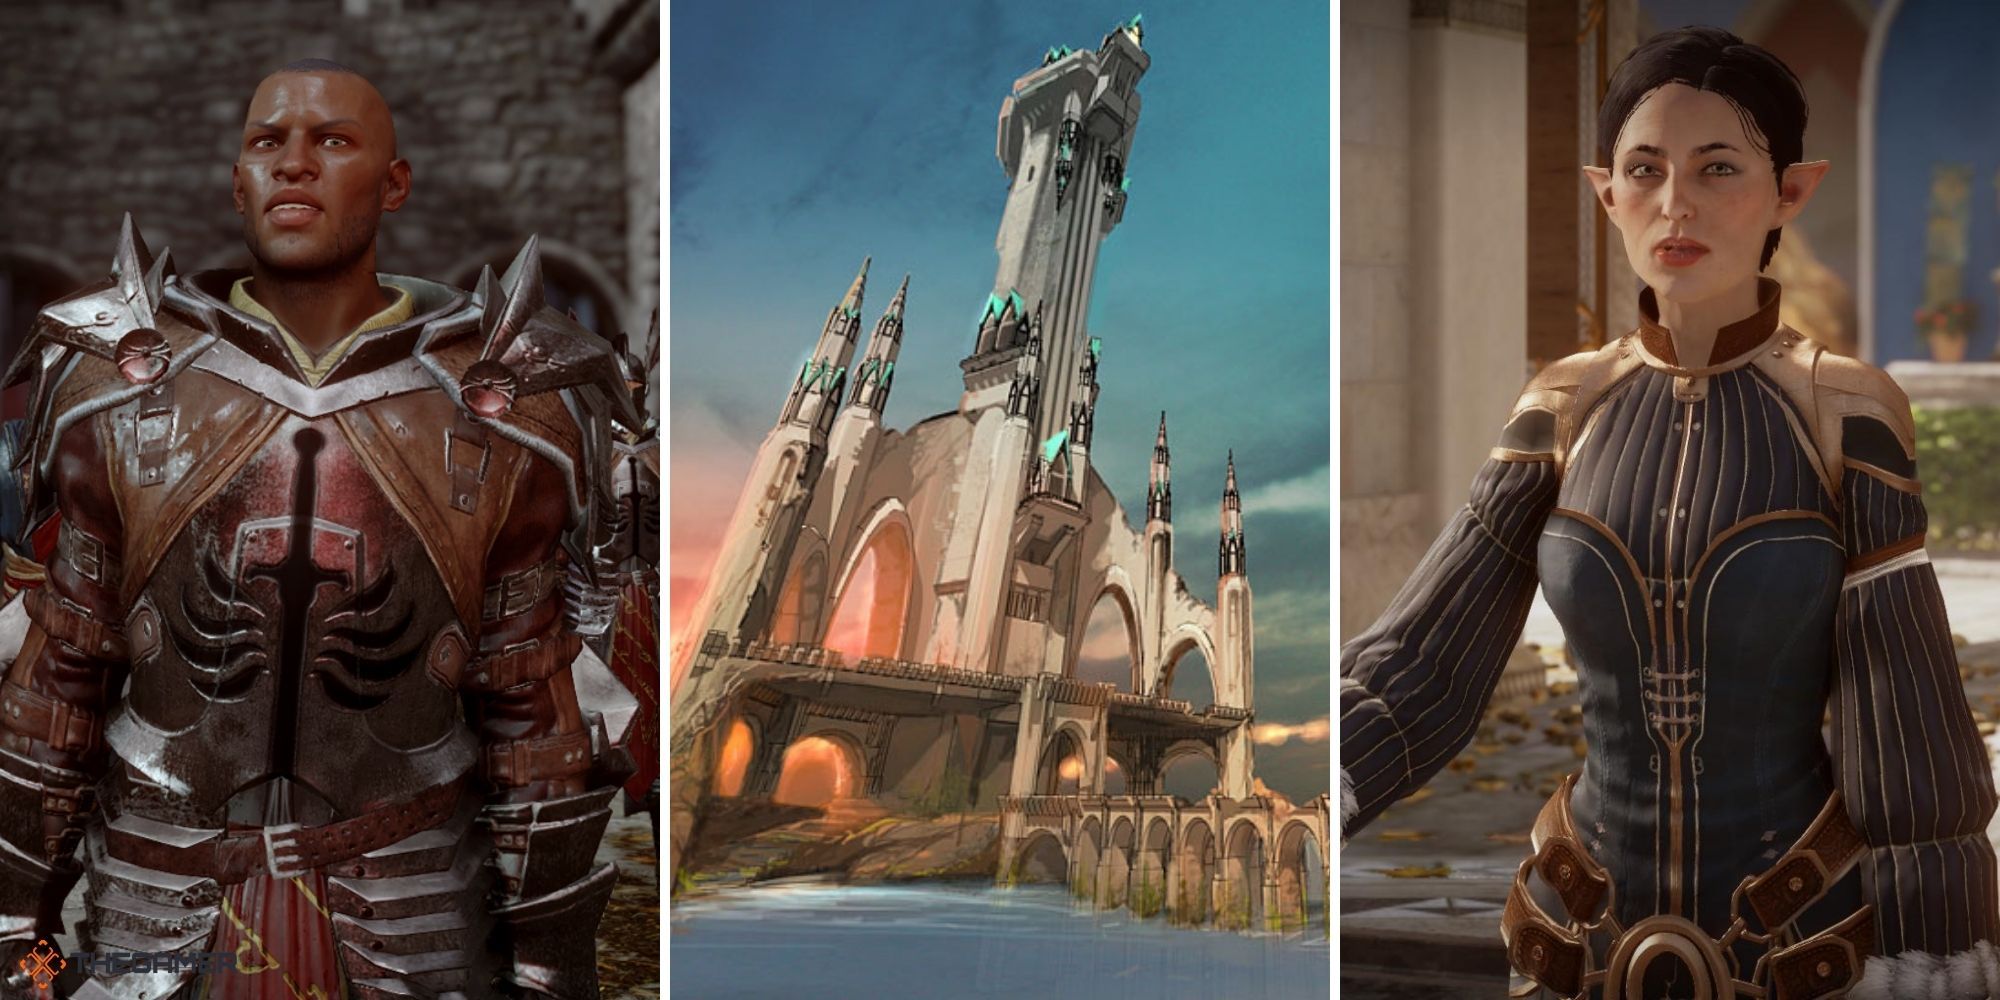 Dragon Age - Templar on left, Mage on right, Ferelden Circle concept art in centre